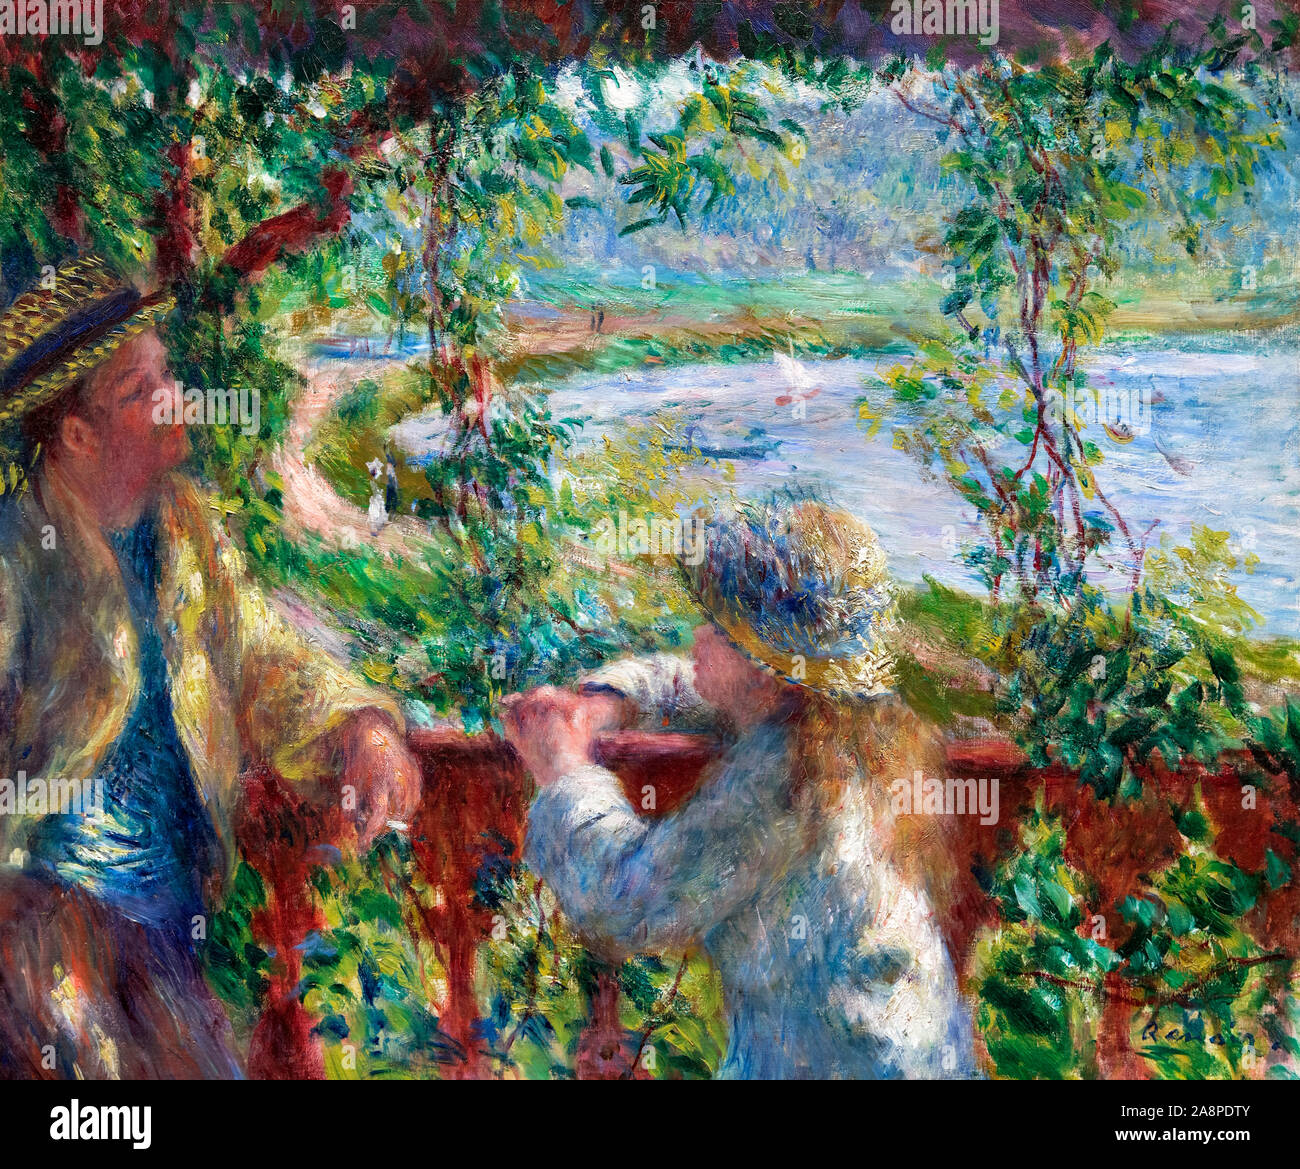 Near the Lake by Pierre Auguste Renoir (1841-1919), oil on canvas, 1879/80 Stock Photo